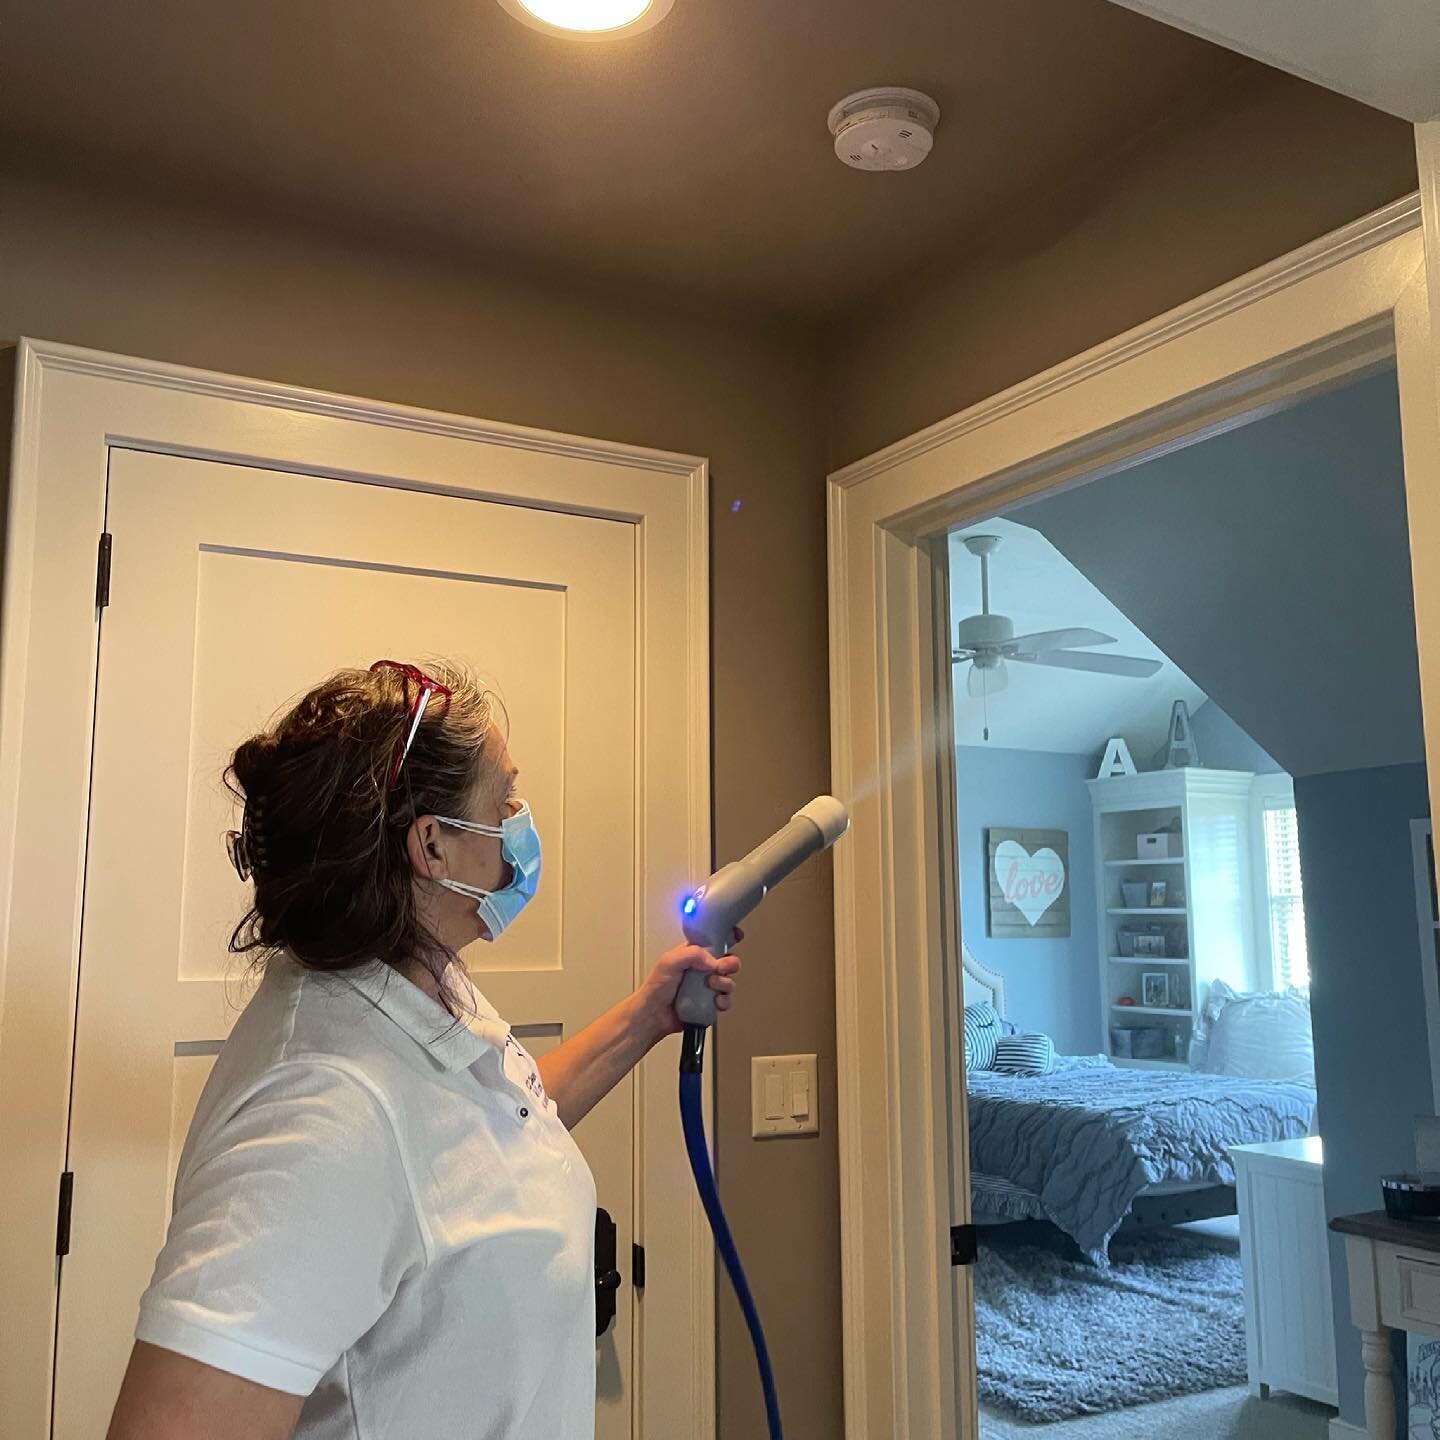 262-719-1306 Call today for a quote!! Clorox 360 Electrostatic sanitizing a home. ❤️ #lakecountrywi #ocdcleaning #ocdcleanerswi #electrostaticdisinfecting